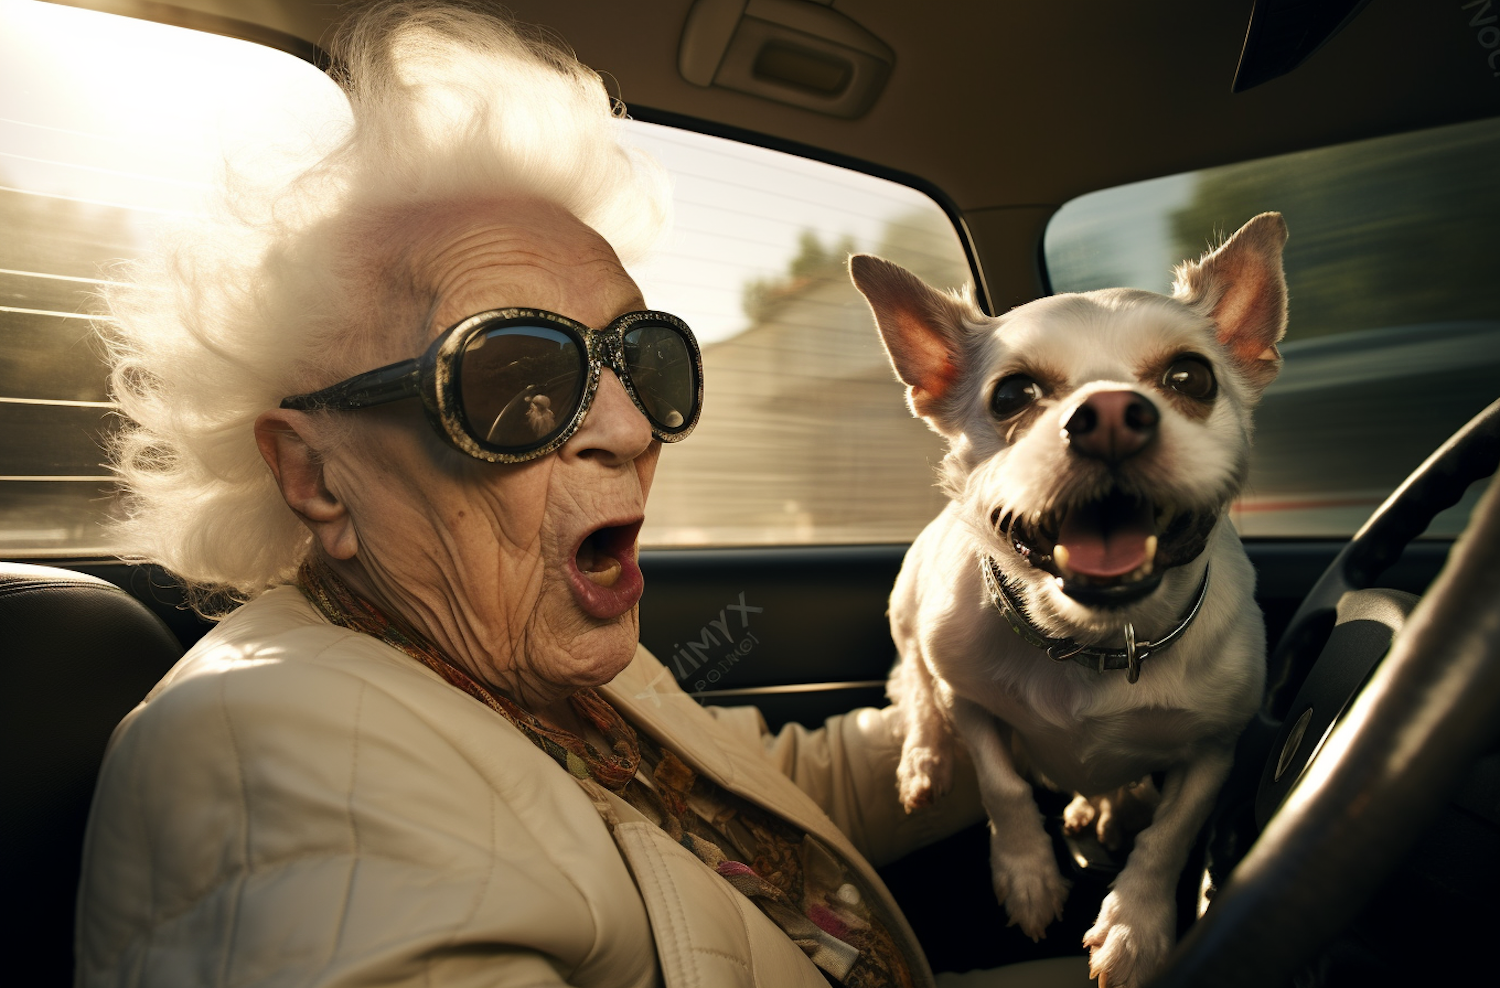 Sunset Ride Surprise with Granny and Pup